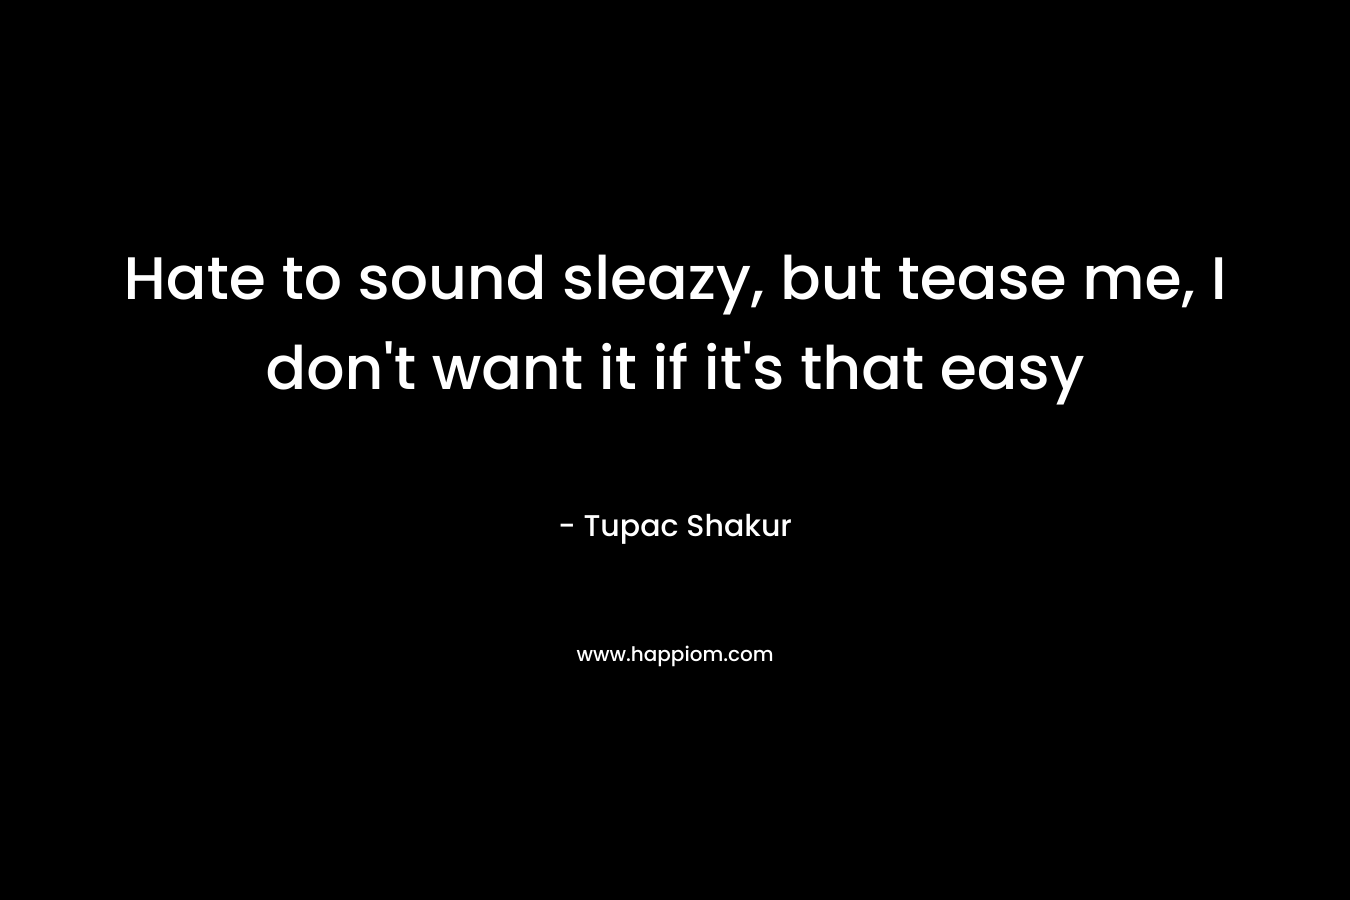 Hate to sound sleazy, but tease me, I don’t want it if it’s that easy – Tupac Shakur